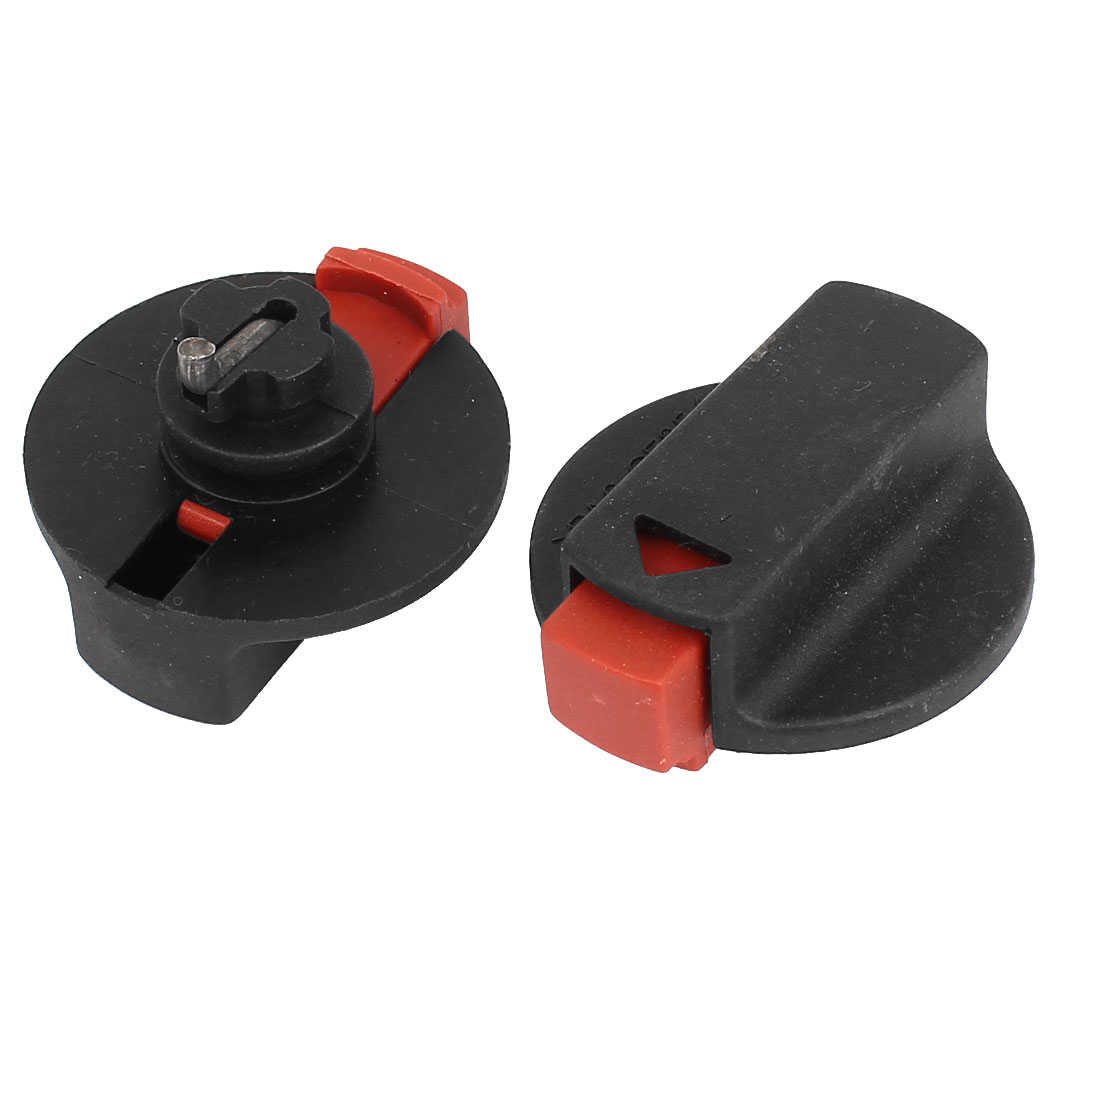 2Pcs Replacements Part Plastic Rotary Hammer Knob Switch for Bosch GBH2-24